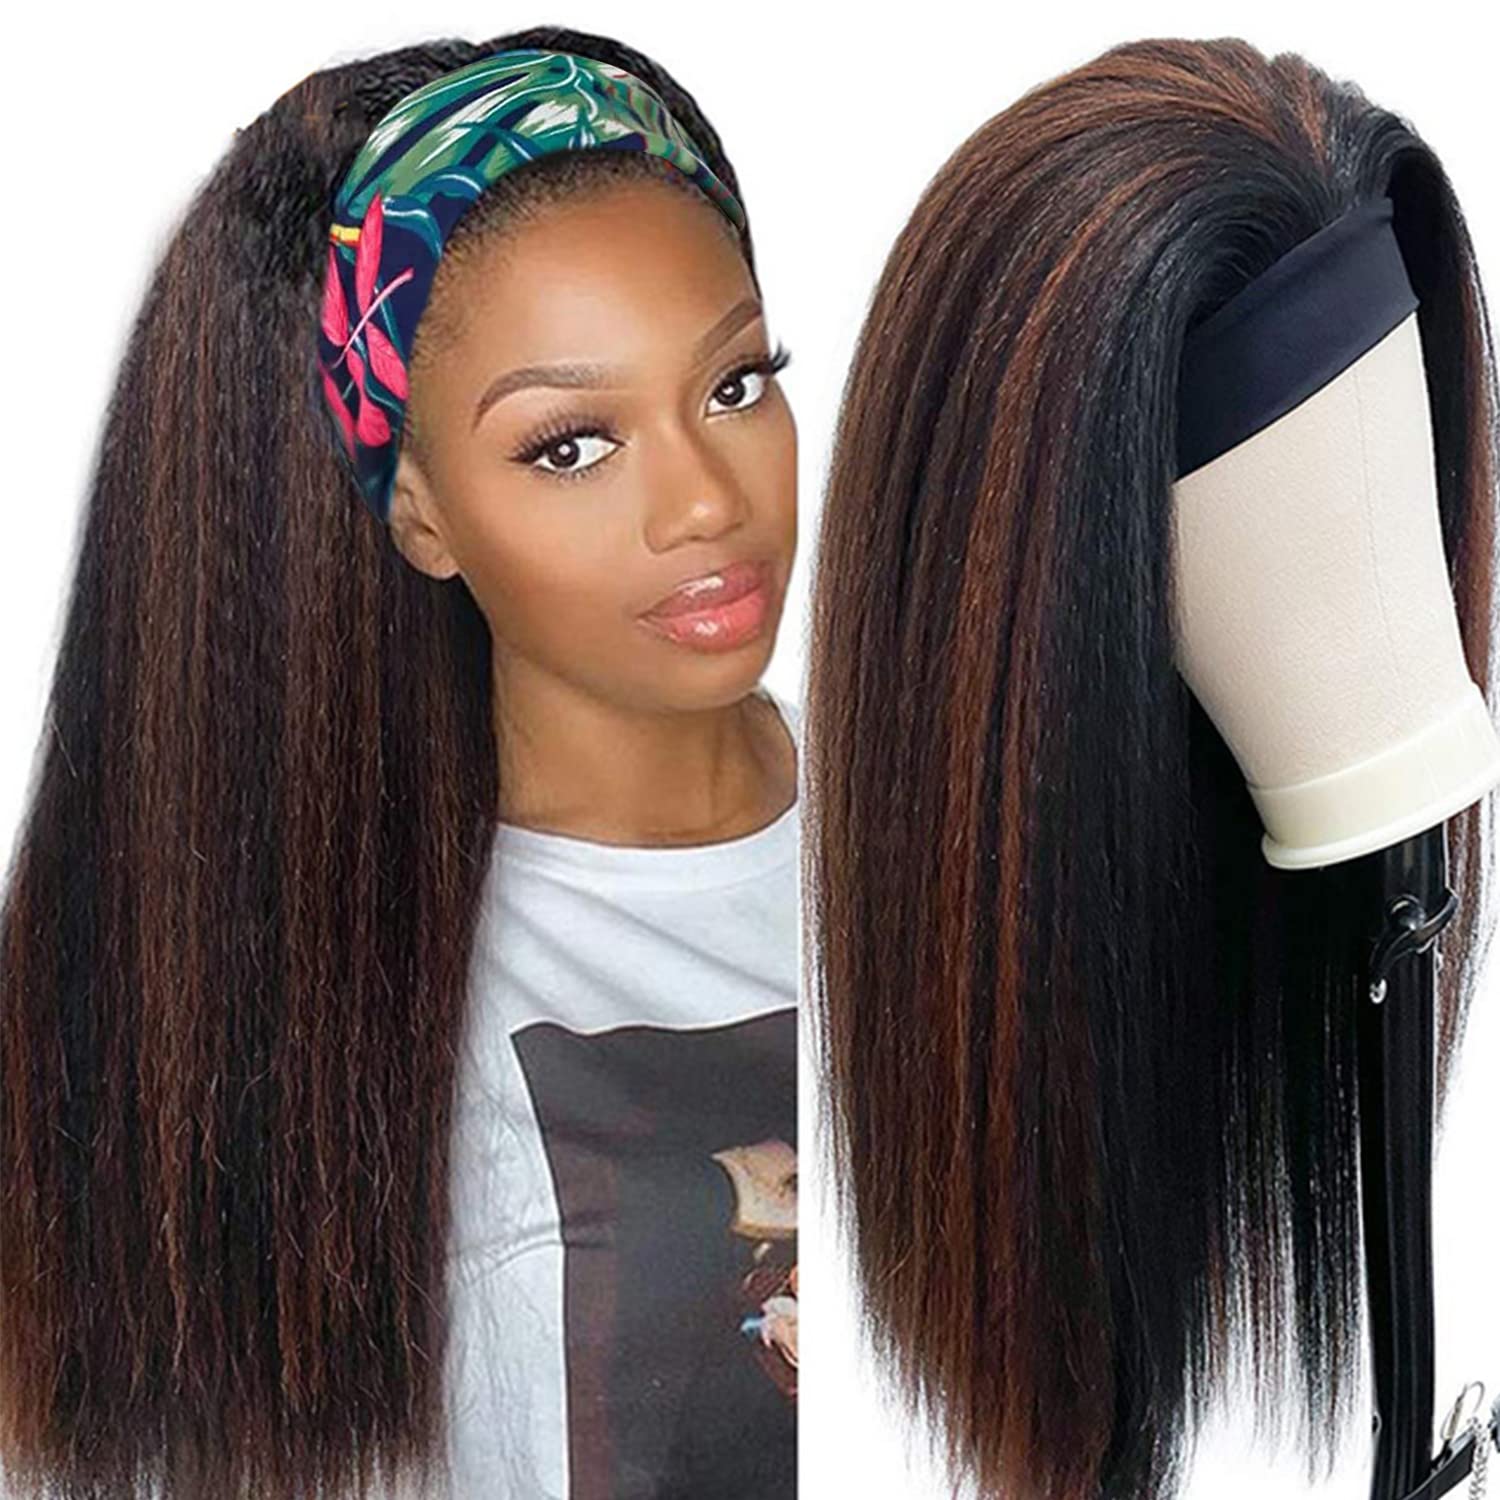 Straight Headband Wigs for Women Long Black Yaki Straight Headband Wig Synthetic Afro Wig with Headbands Attached Glueless None Lace Front Wig 22inch for Daily